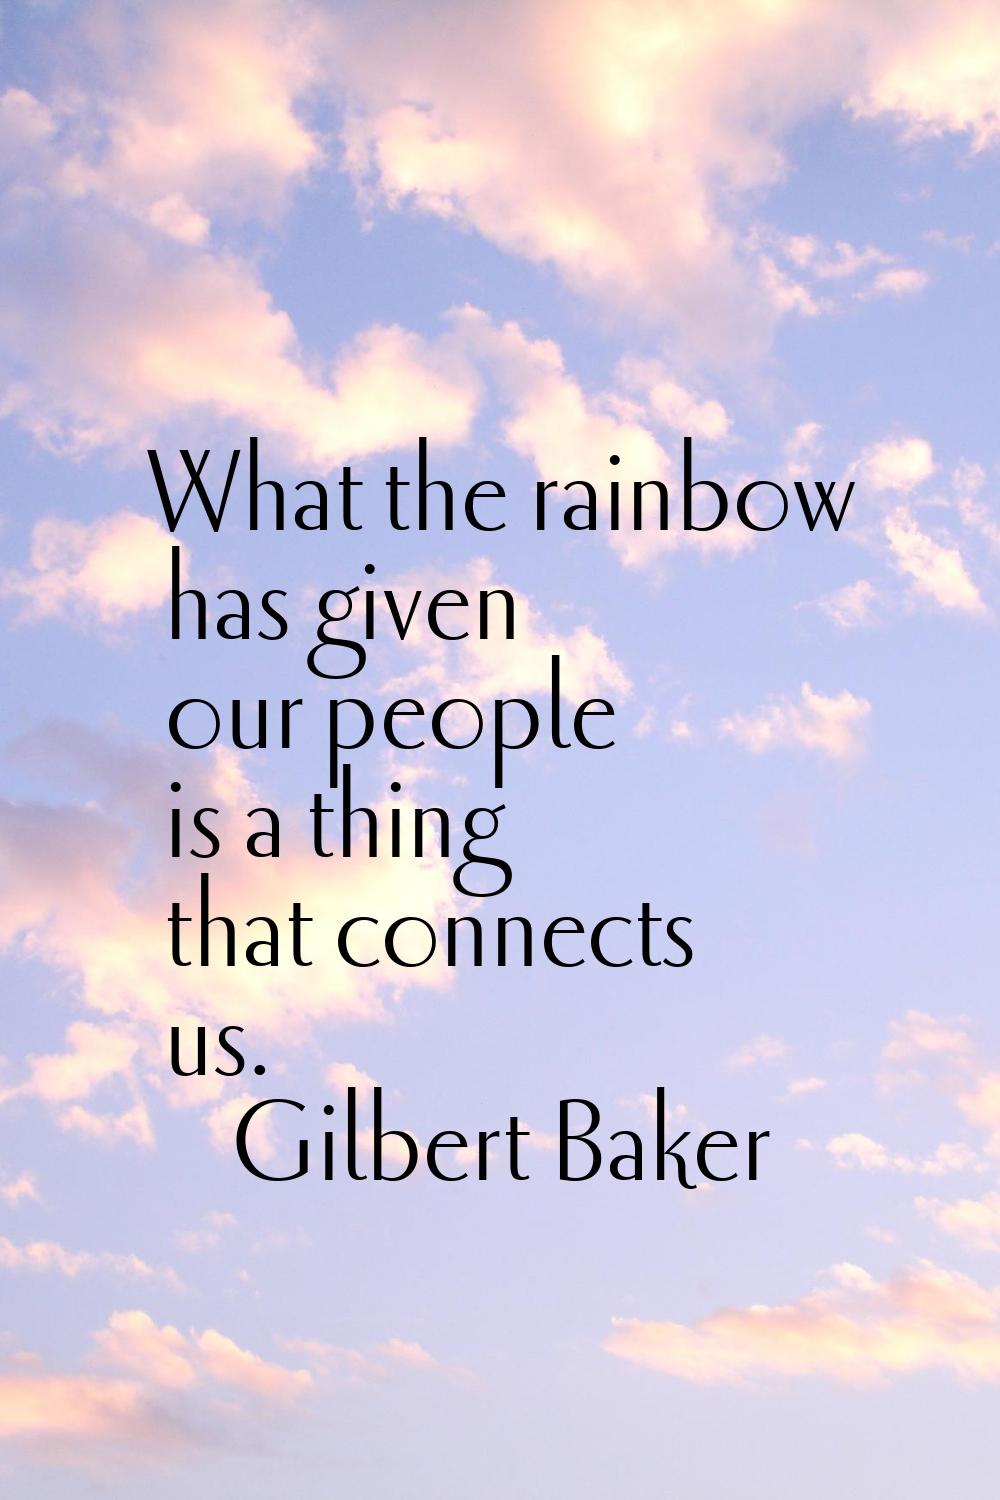 What the rainbow has given our people is a thing that connects us.